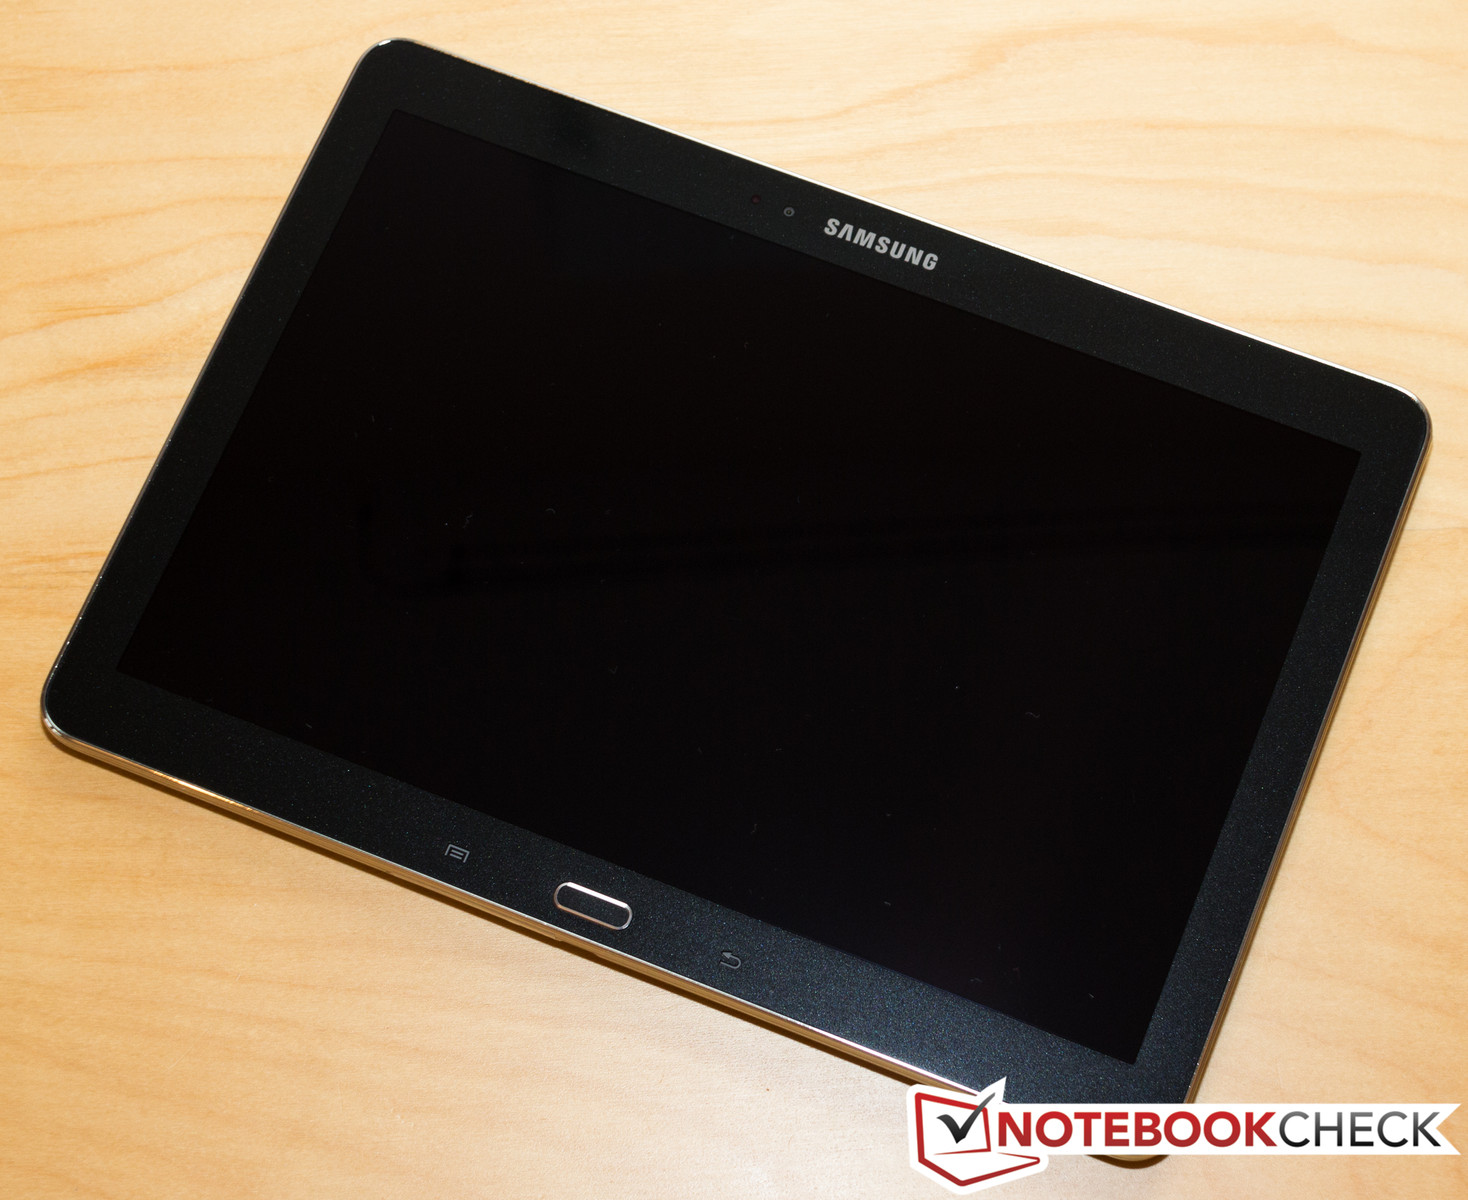 Breve análisis del Tablet Samsung Galaxy Note 10.1 2014 Edition -  Notebookcheck.org